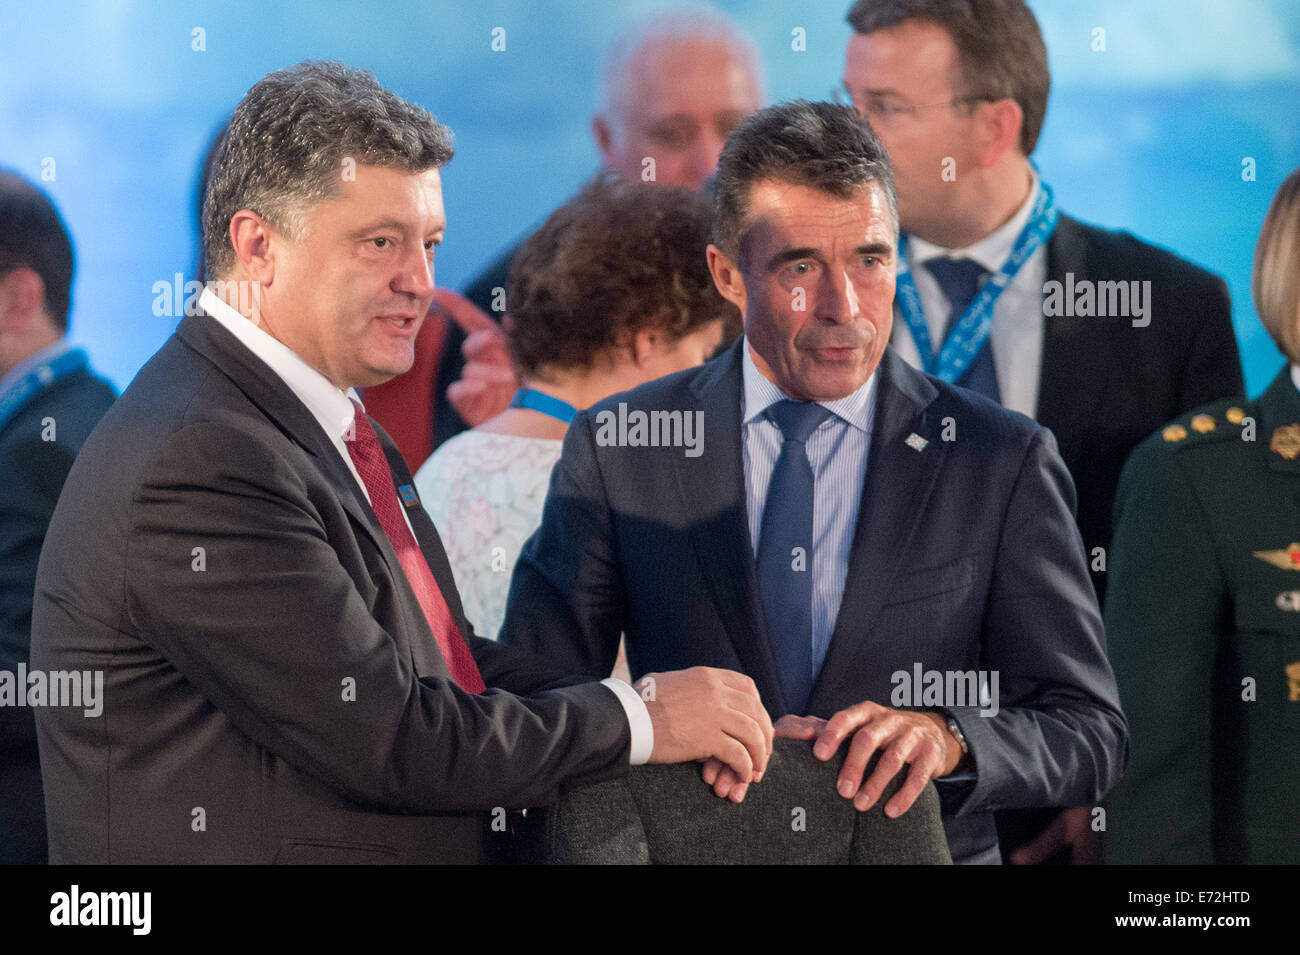 Newport, South Wales. 4th Sep, 2014. NATO General Secretary Anders Fogh Rasmussen (R) and Ukranian President Petro Poroshenko talk prior to the NATO-Ukraine Commission meeting during the NATO summit in Newport, South Wales, 4 September 2014. World leaders from about 60 countries are coming together for a two-day NATO summit taking place from 04-05 September 2014. PHOTO: MAURIZIO GAMBARINI/dpa/Alamy Live News Stock Photo